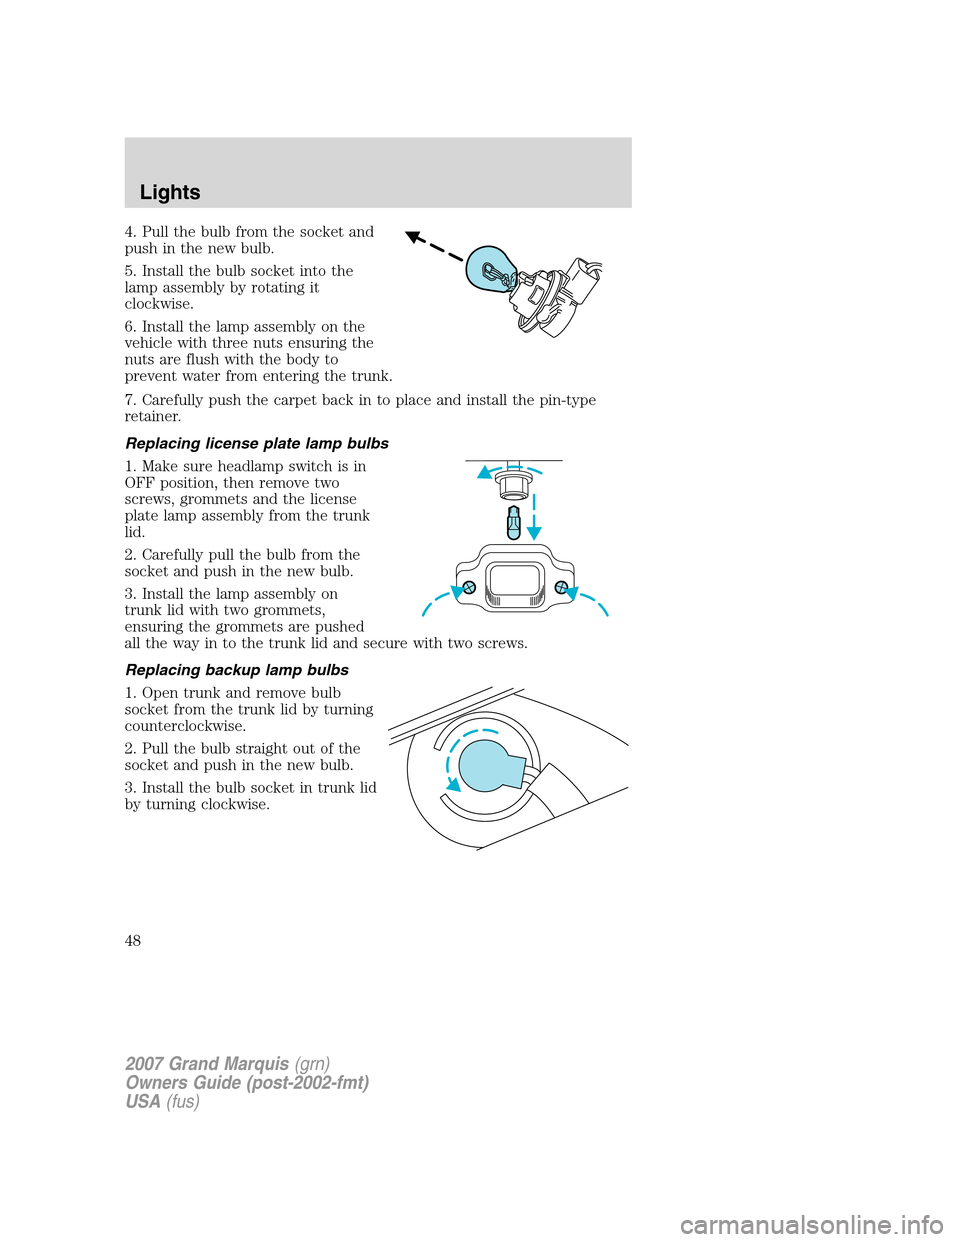 Mercury Grand Marquis 2007  Owners Manuals 4. Pull the bulb from the socket and
push in the new bulb.
5. Install the bulb socket into the
lamp assembly by rotating it
clockwise.
6. Install the lamp assembly on the
vehicle with three nuts ensur